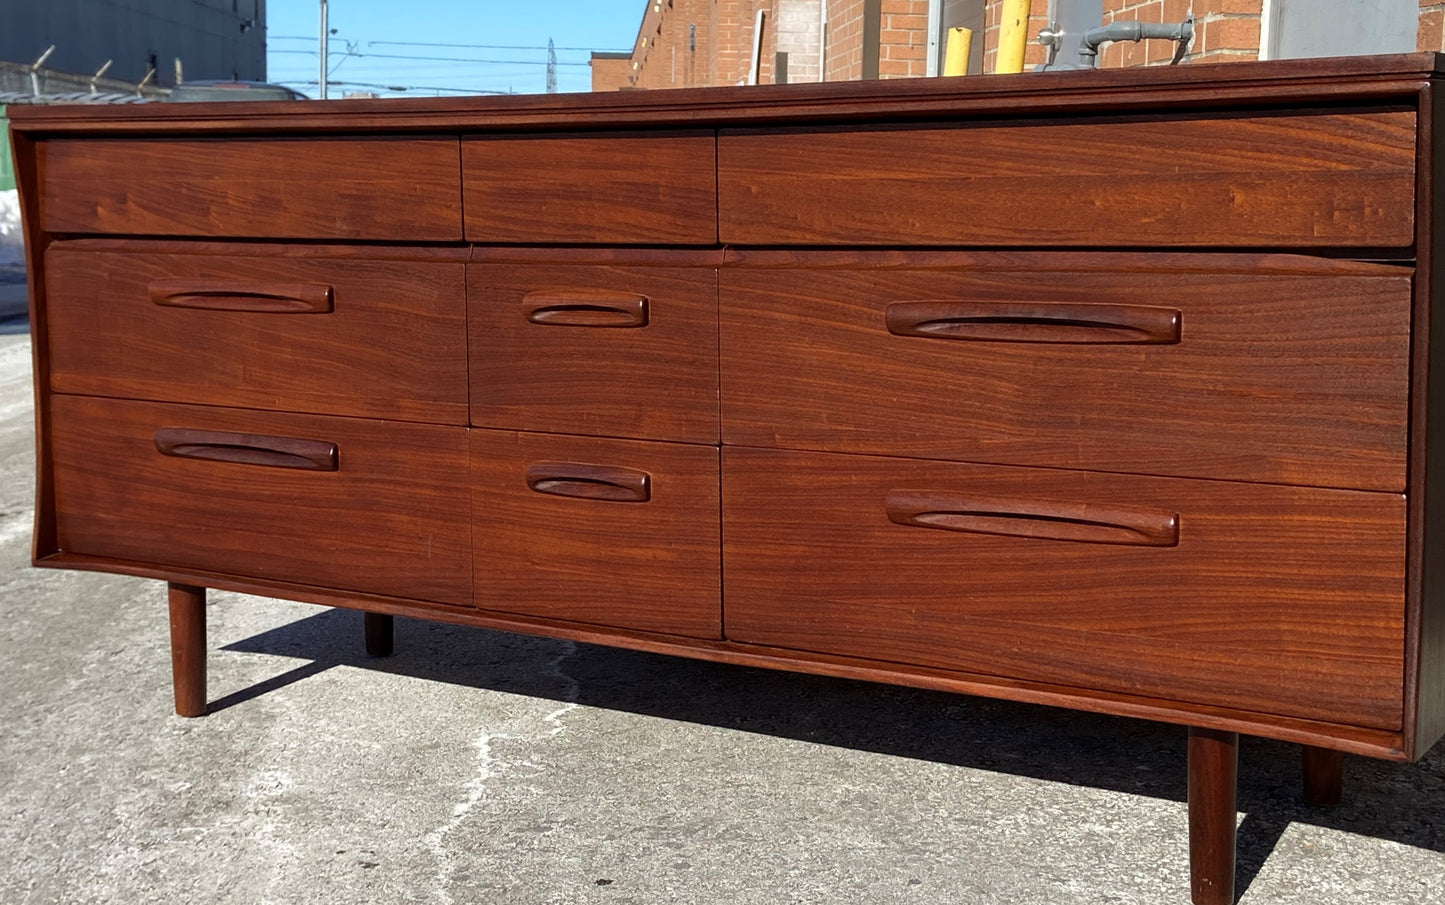 REFINISHED Mid Century Modern SOLID TEAK Dresser by J. Kuypers for Imperial